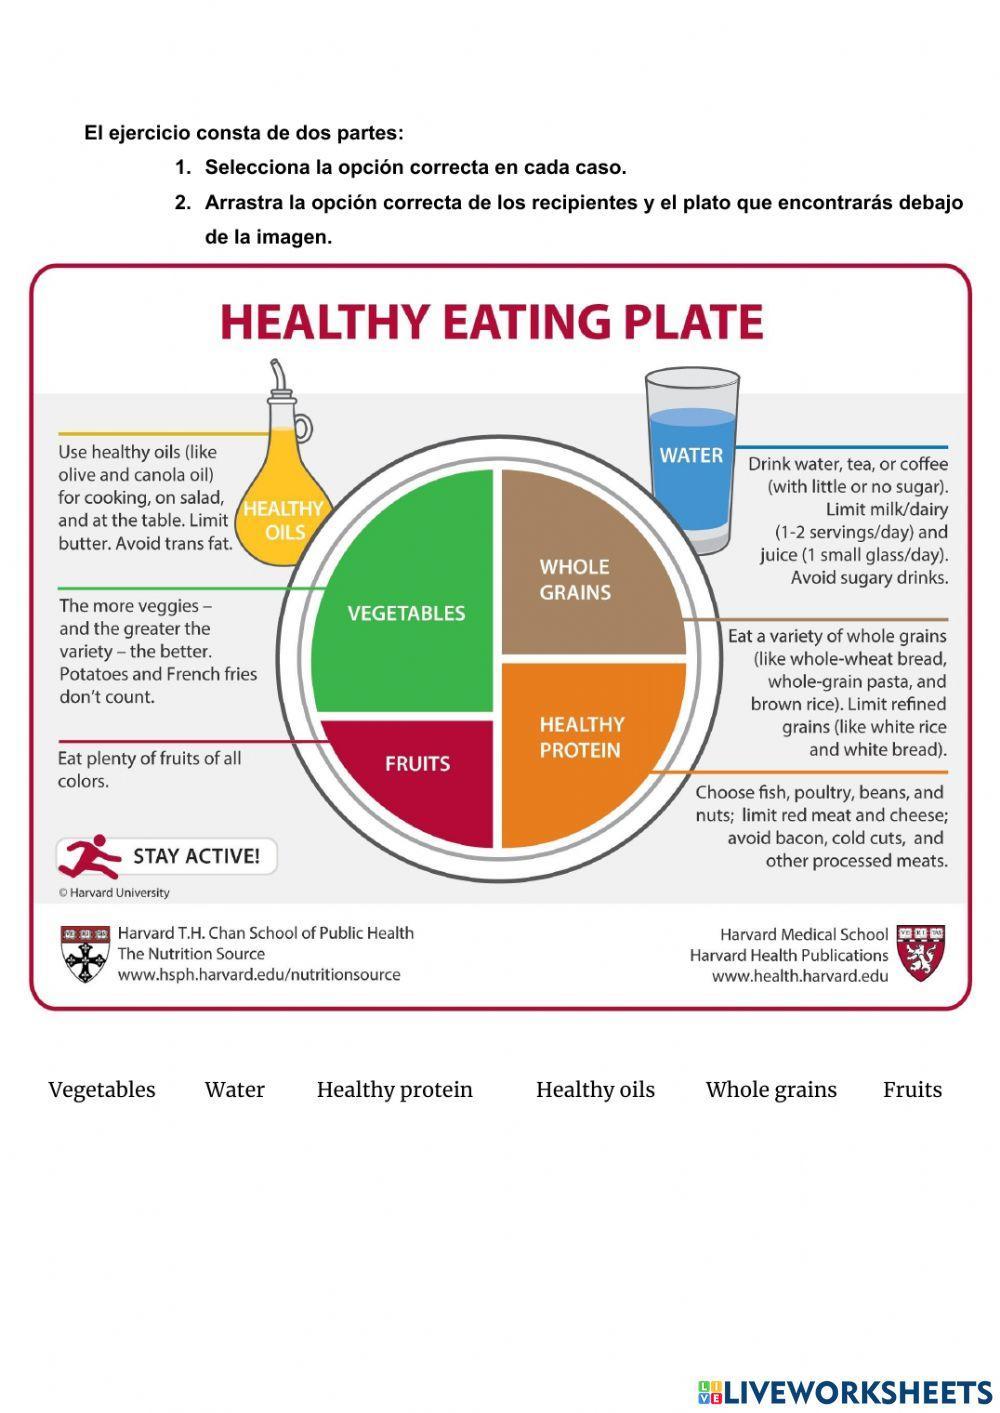 The healthy plate